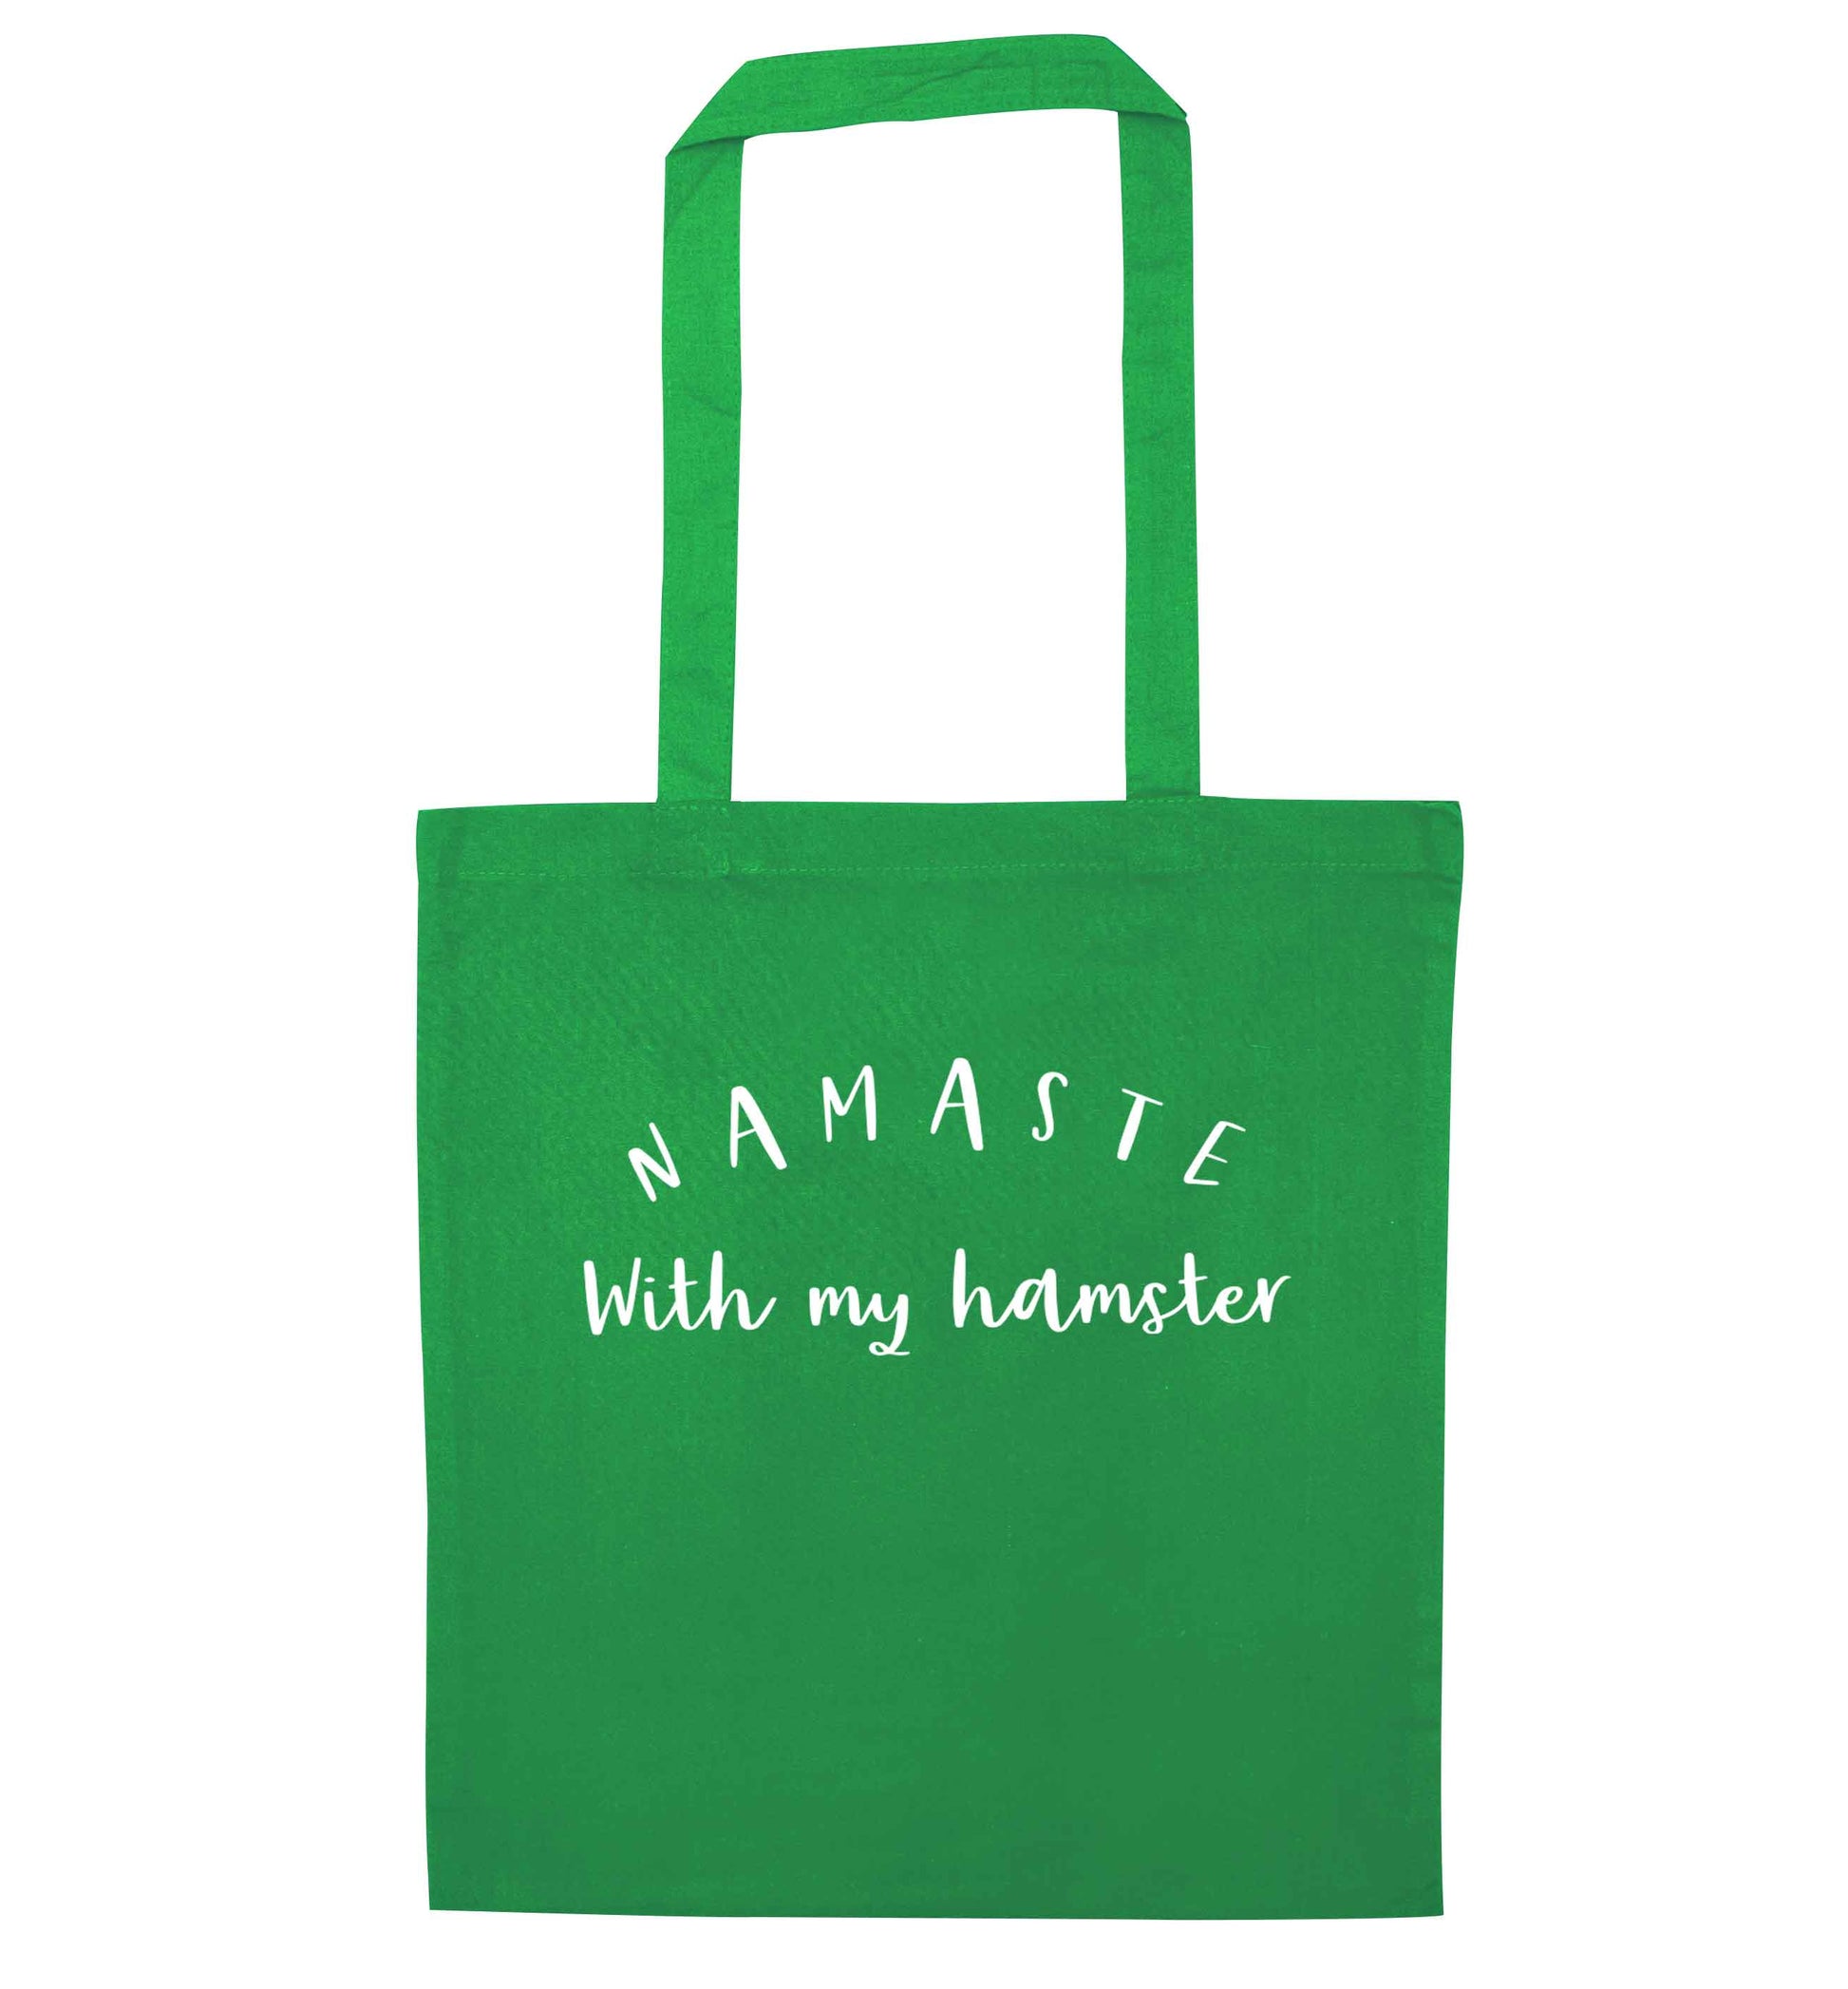 Namaste with my hamster green tote bag